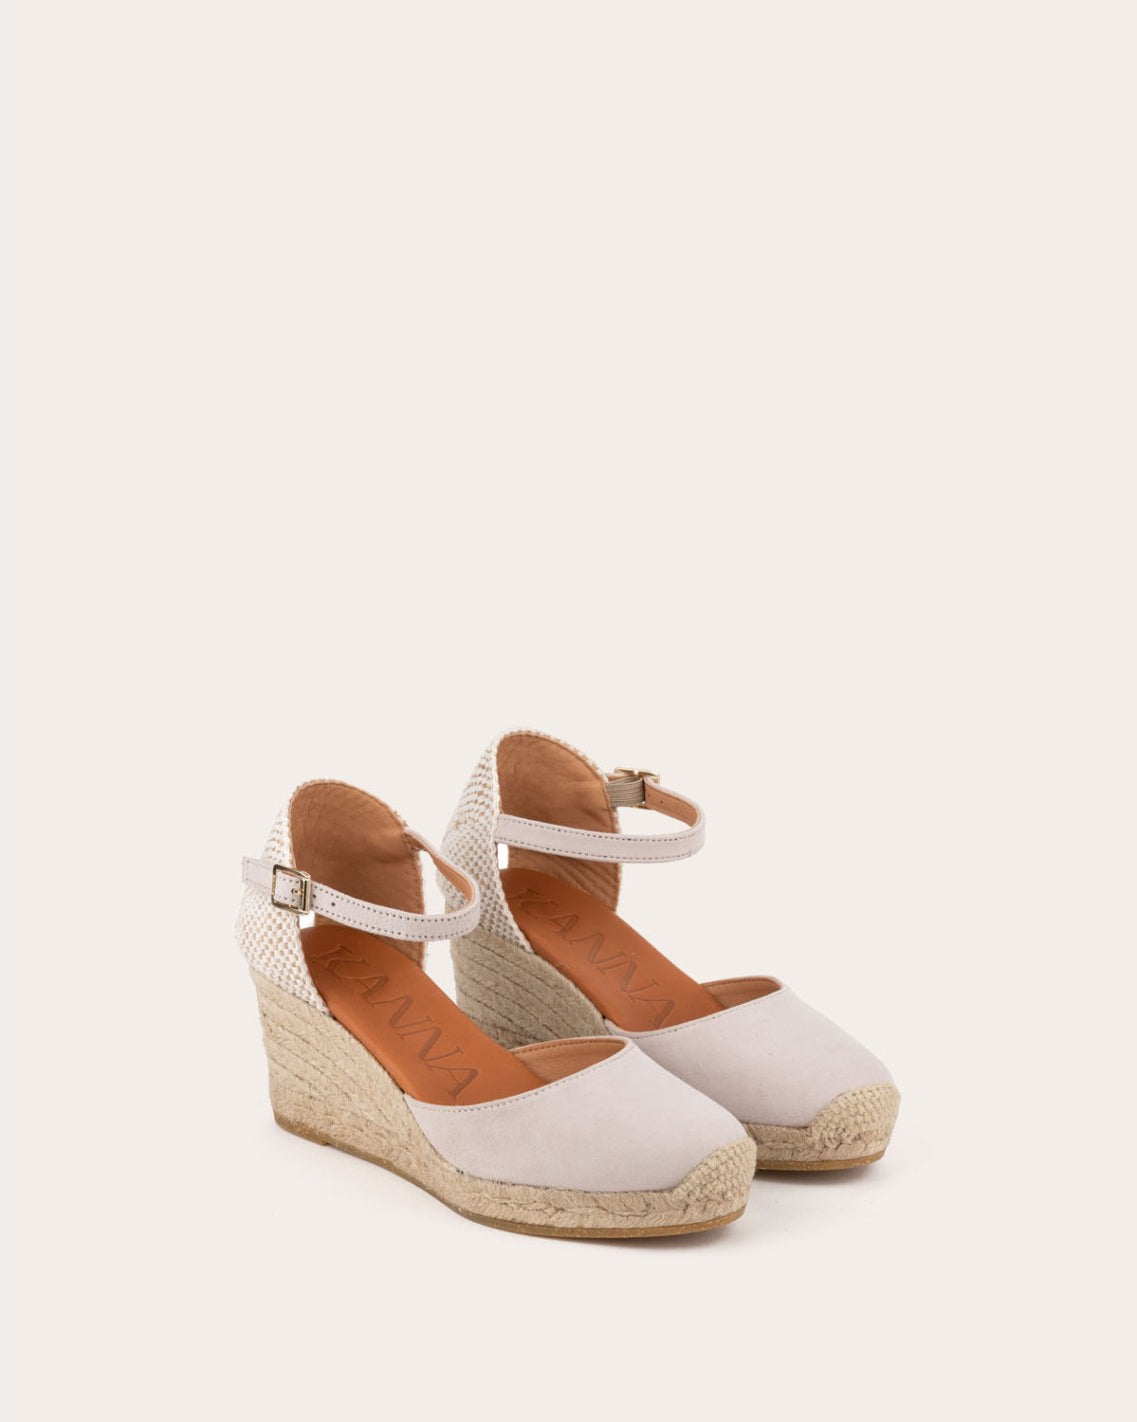 Kanna Laura Nude Espadrille Wedge Shoes